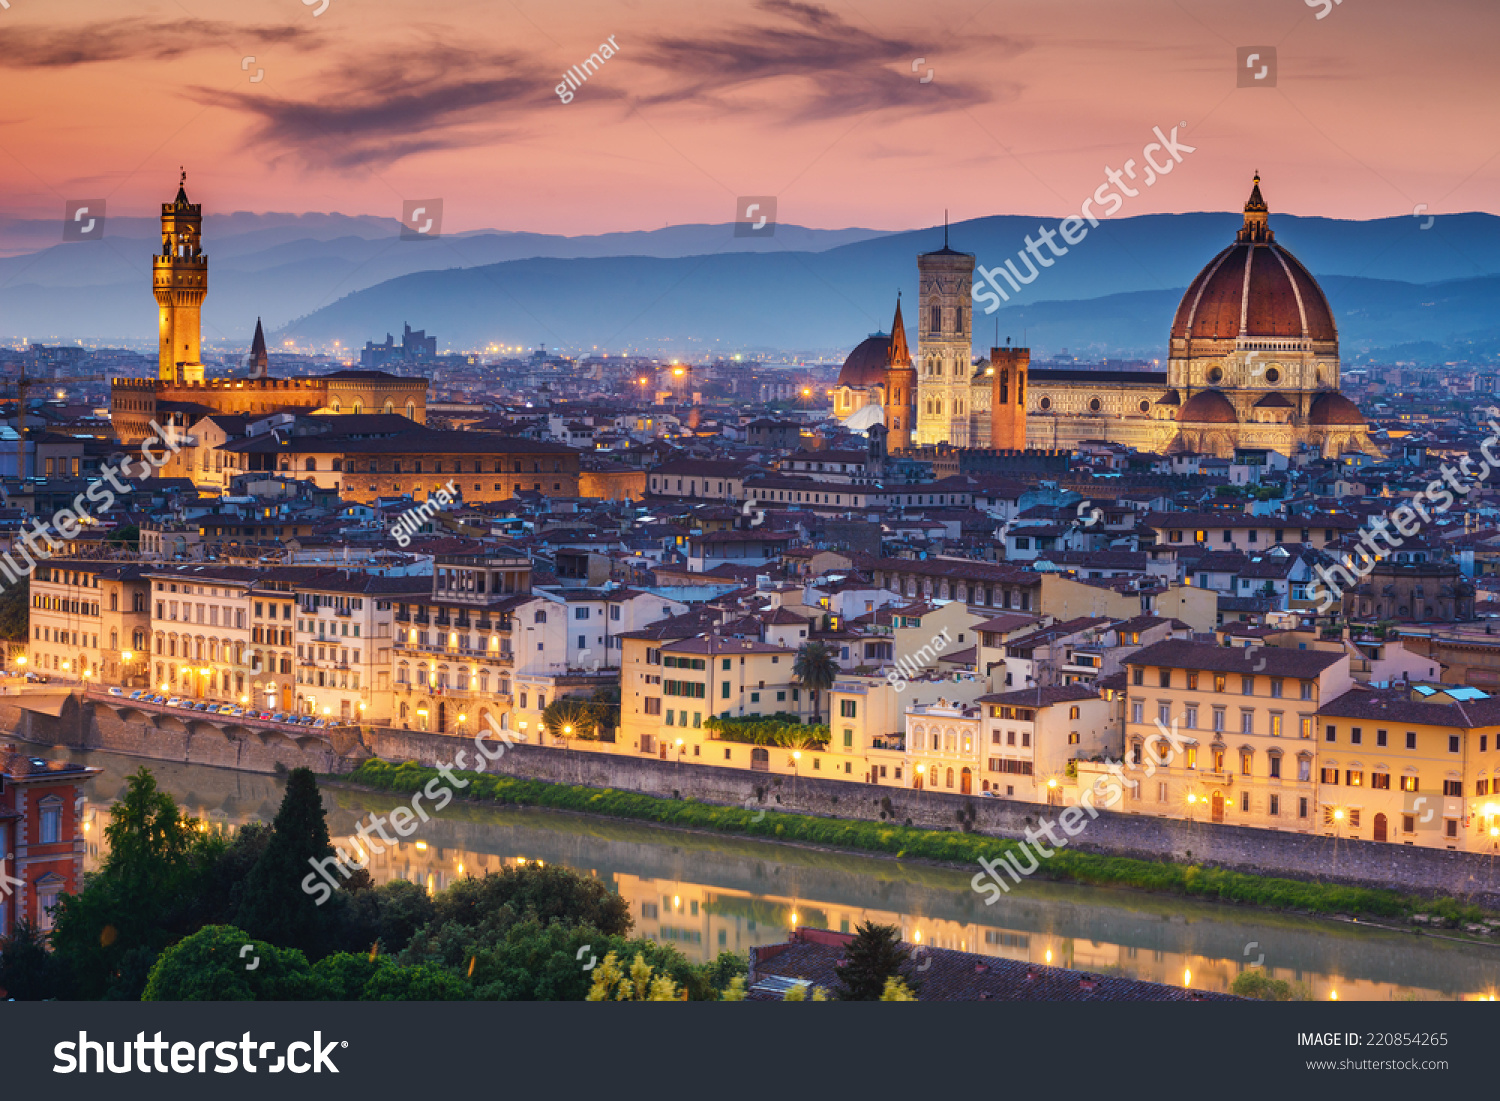 Beautiful sunset over Cathedral of Santa Maria del Fiore (Duomo), Florence, Italy #220854265